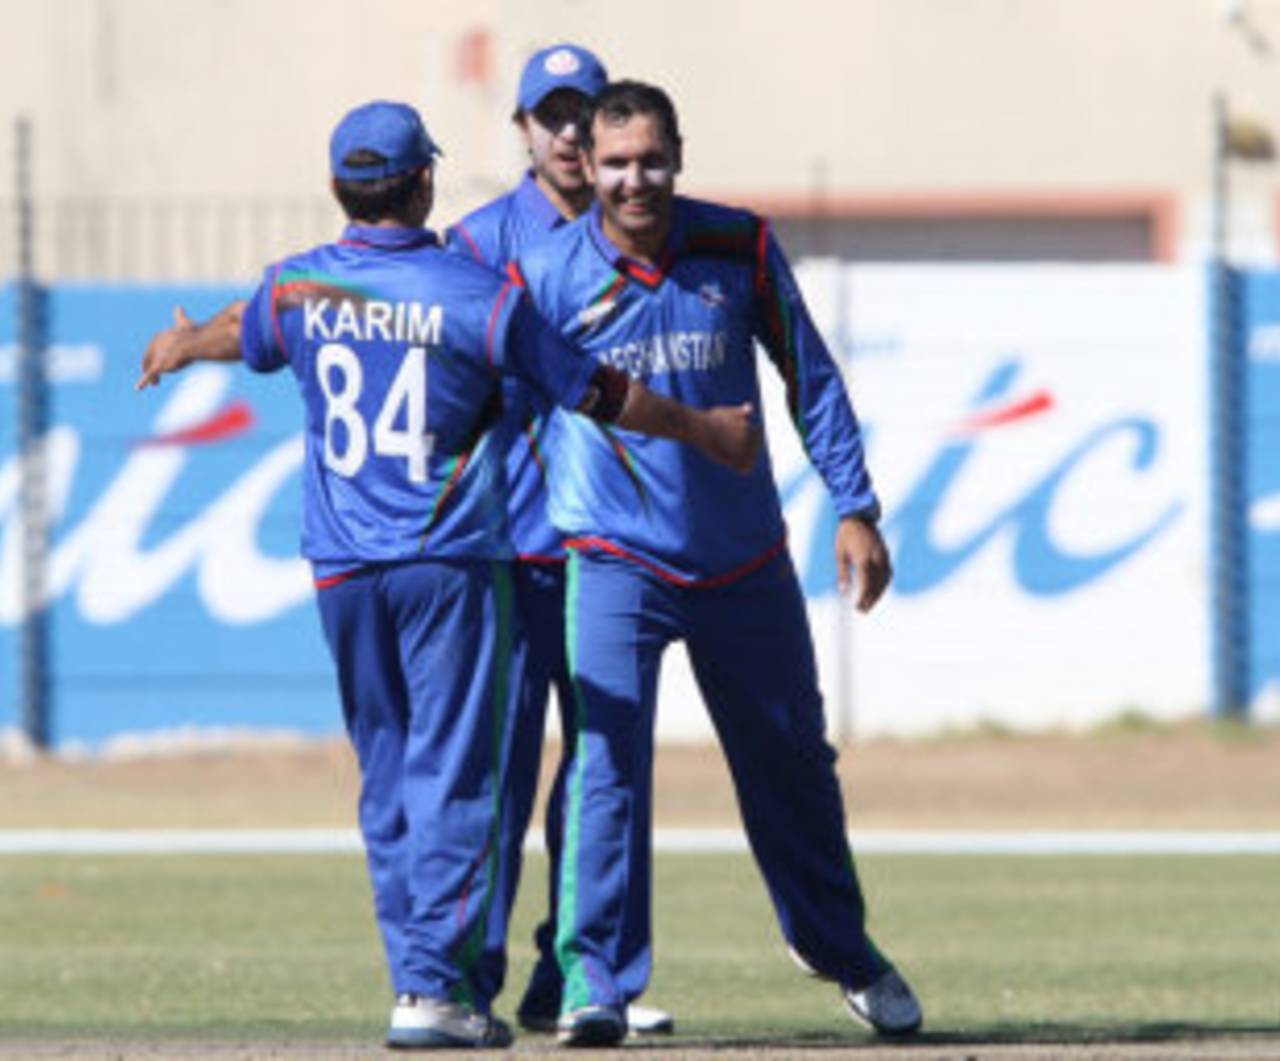 Mohammad Nabi took five wickets for 12 runs, his first five-for haul in List A cricket, Namibia v Afghanistan, WCL Championship, Windhoek, August 9, 2013